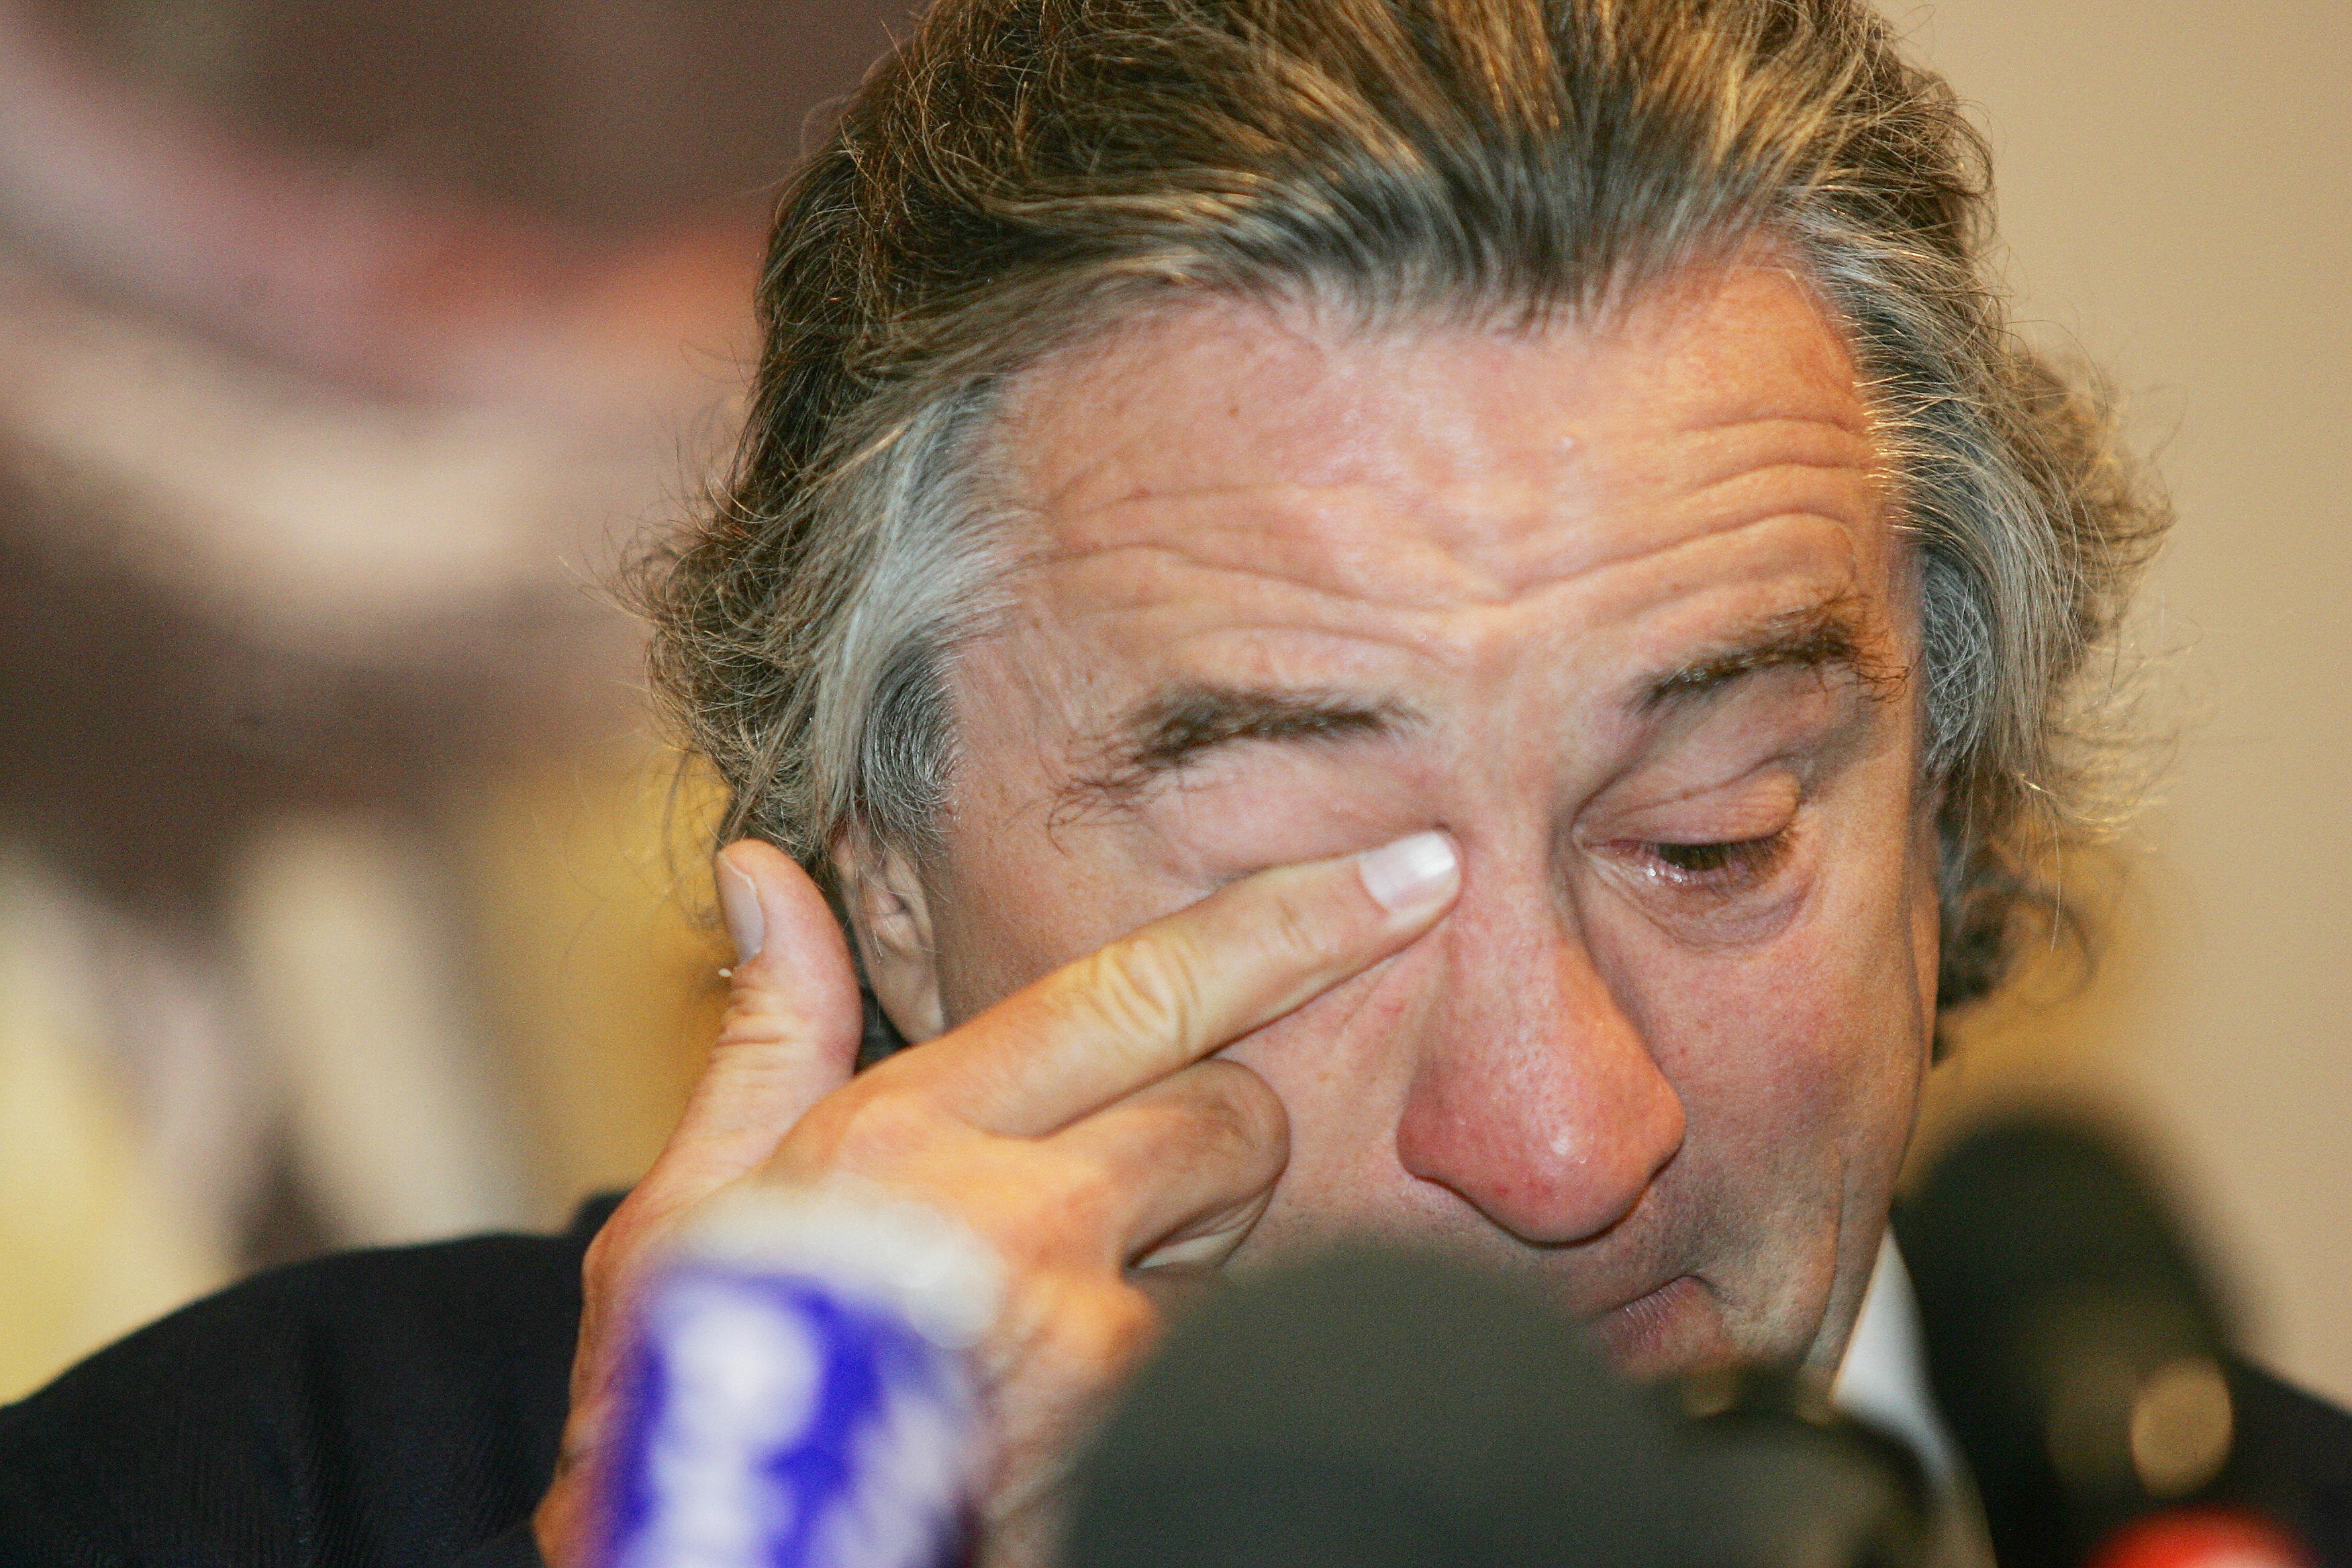 Robert De Niro holds a press conference on his late father, Robert De Niro Senior, painting exhibition, on 18 June 2005 in "La piscine" museum in Roubaix, France | Source: Getty Images